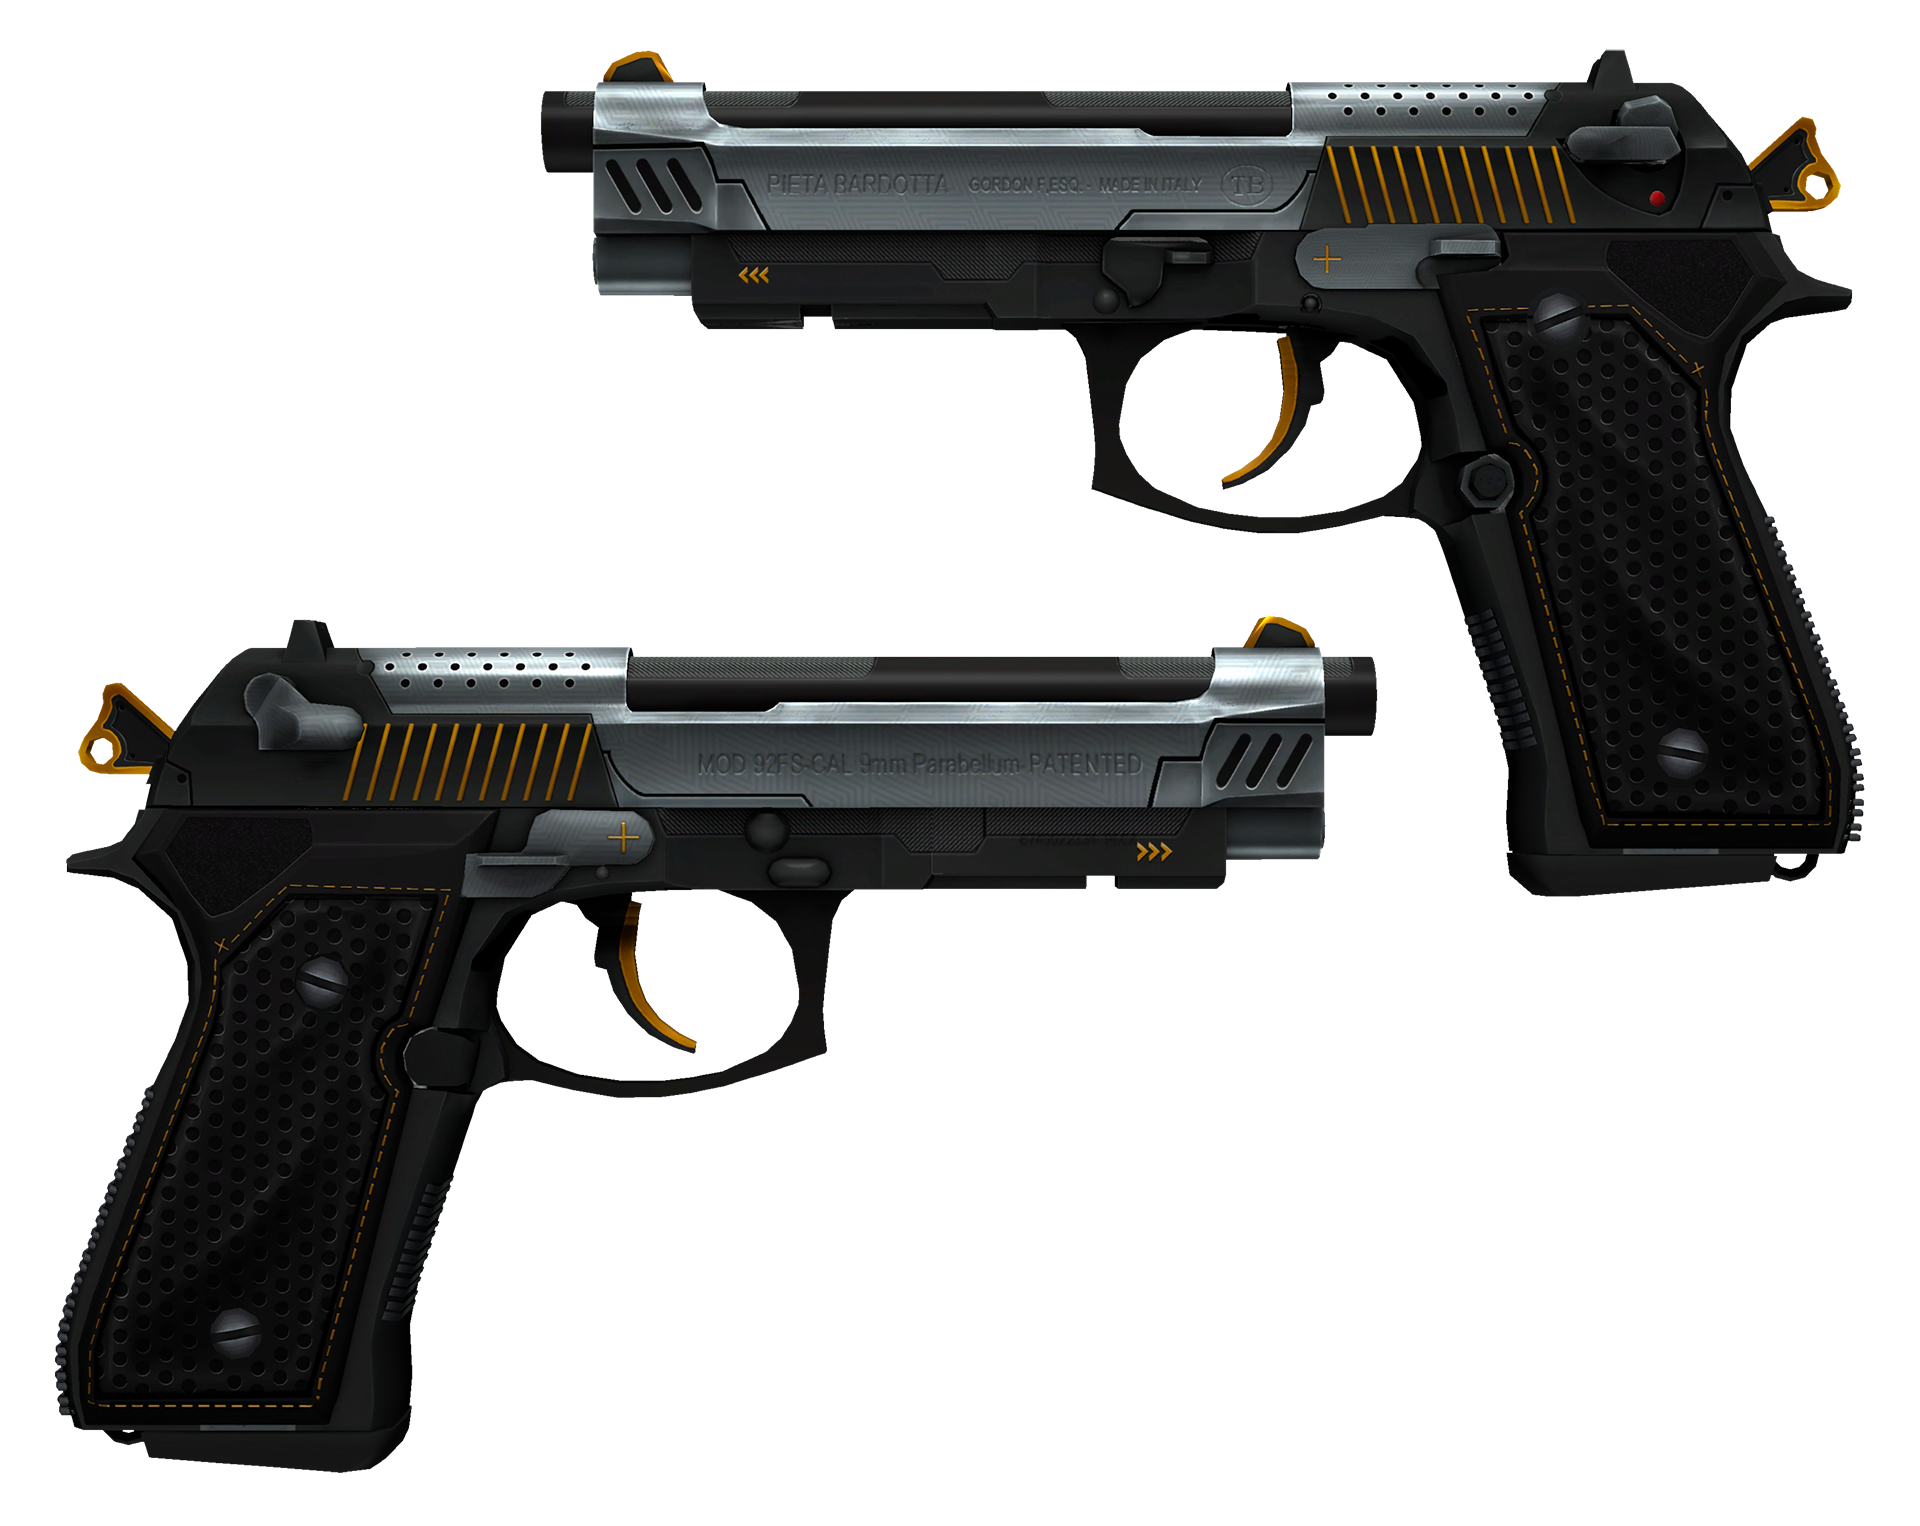 Dual Berettas Stained cs go skin download the new for android